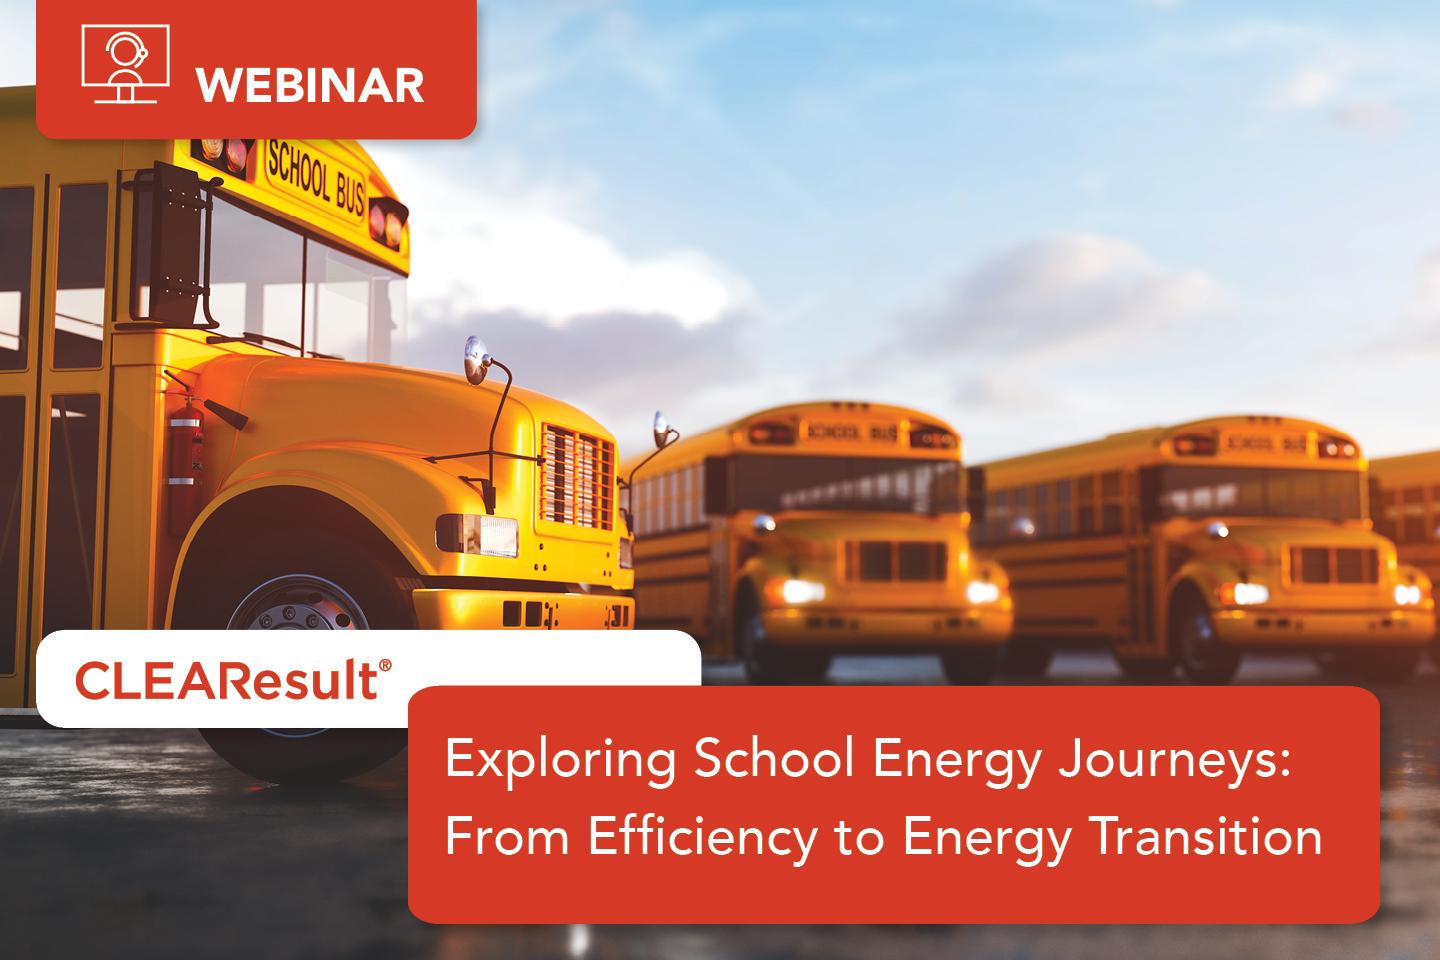 RSVP for Exploring School Energy Journeys: From Efficiency to Energy Transition